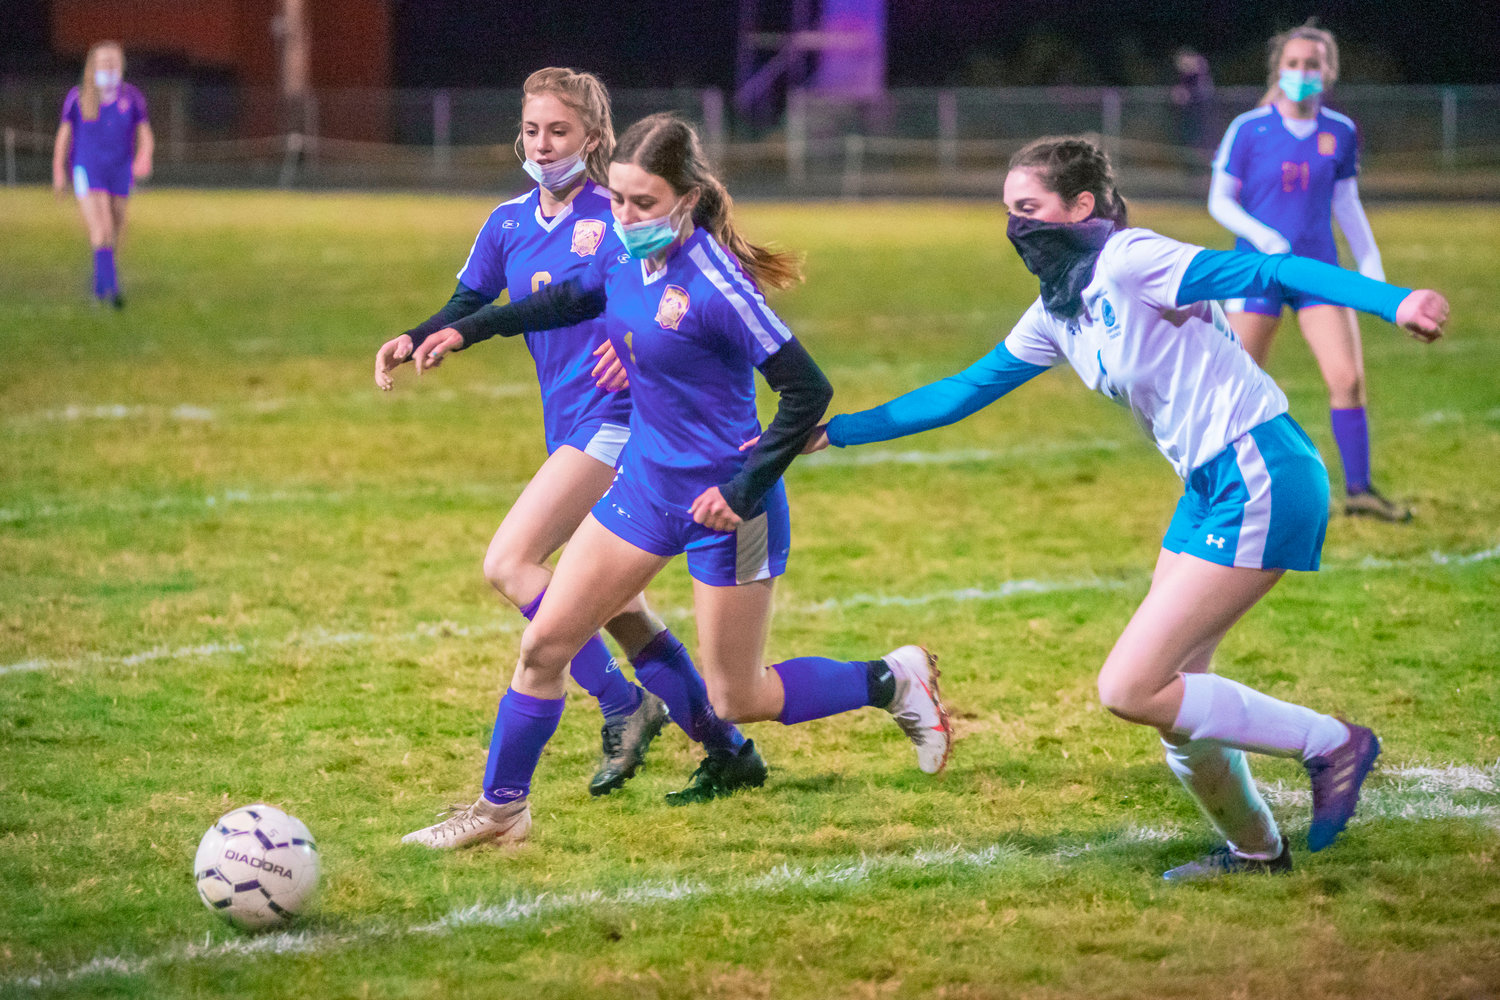 Onalaska’s Haille Brown (6) and Cierra Russ (1) control the ball down the field during a game Wednesday night.